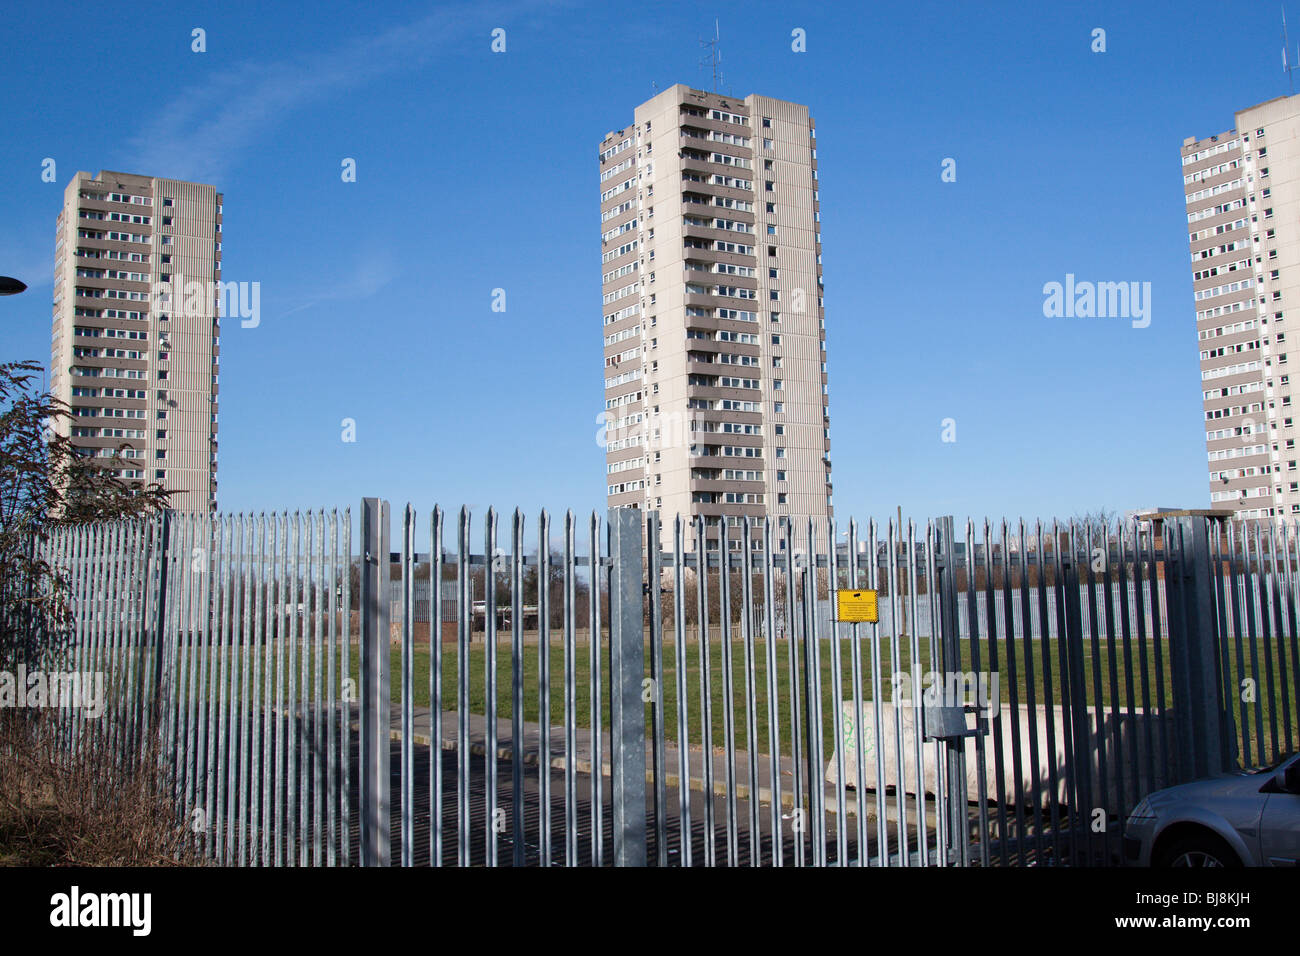 intimidating security fence around local authority council flat blocks in Brentford, London Stock Photo